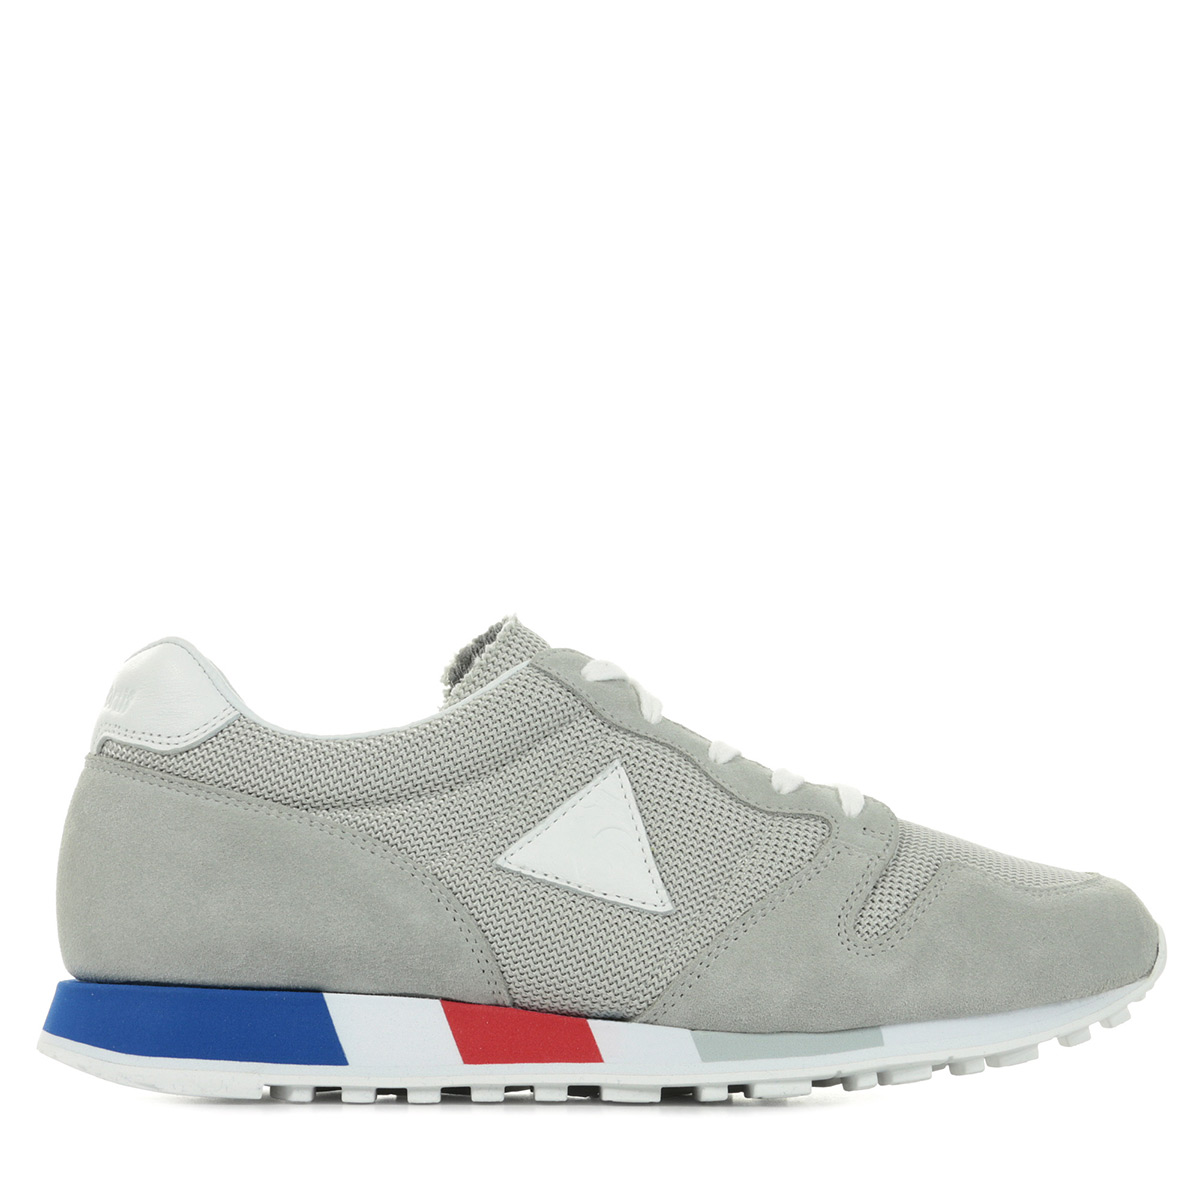 Le Coq Sportif Omega Made In France